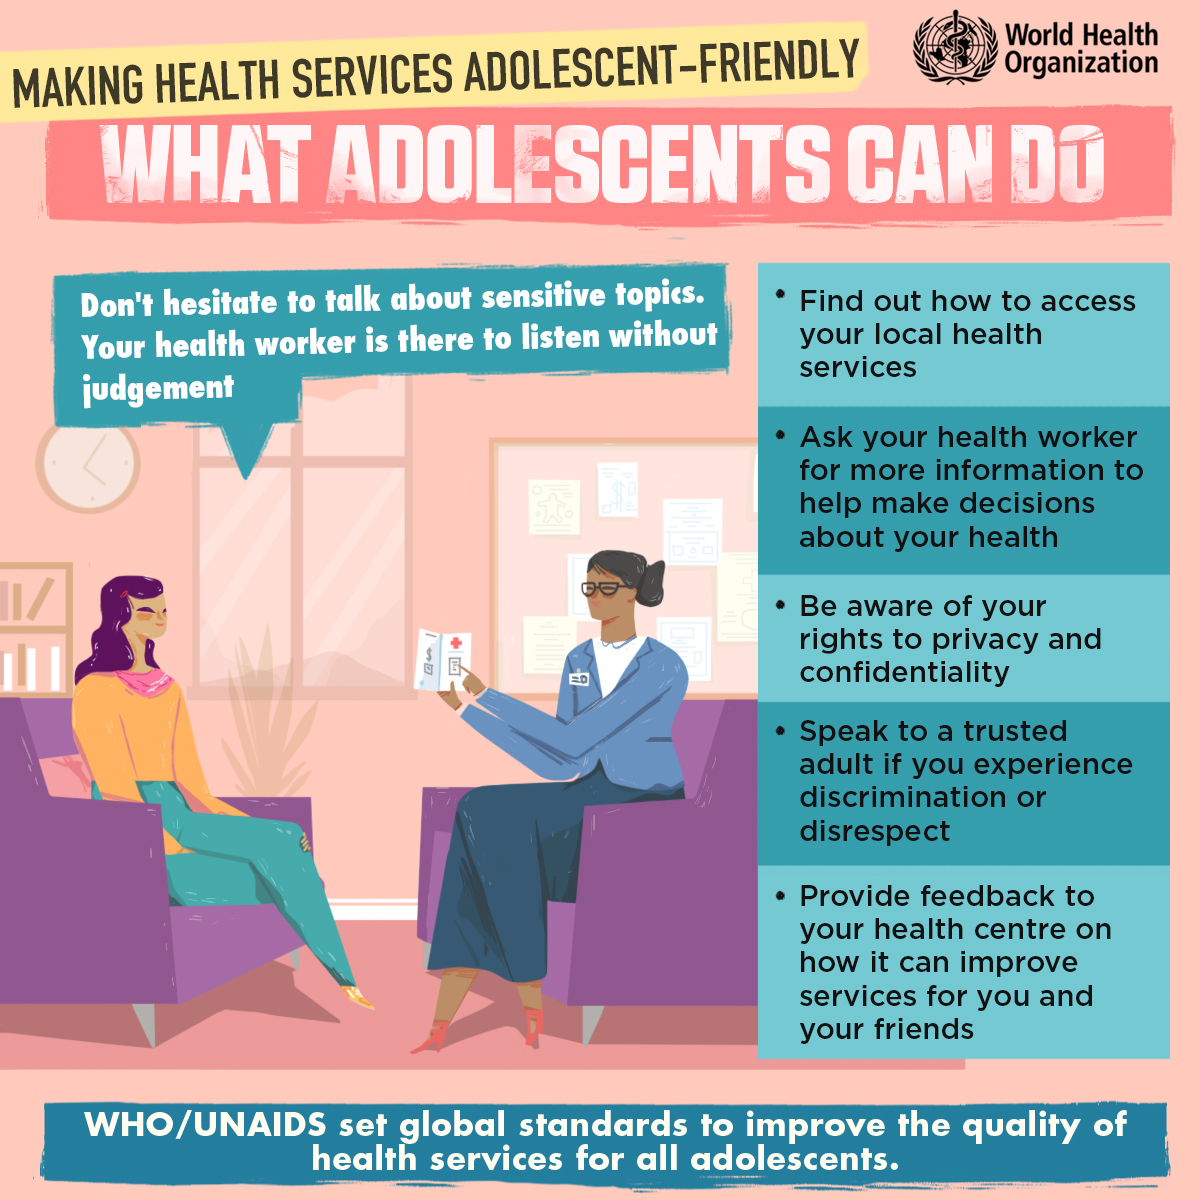 Making health services adolescent-friendly: What adolescents can do